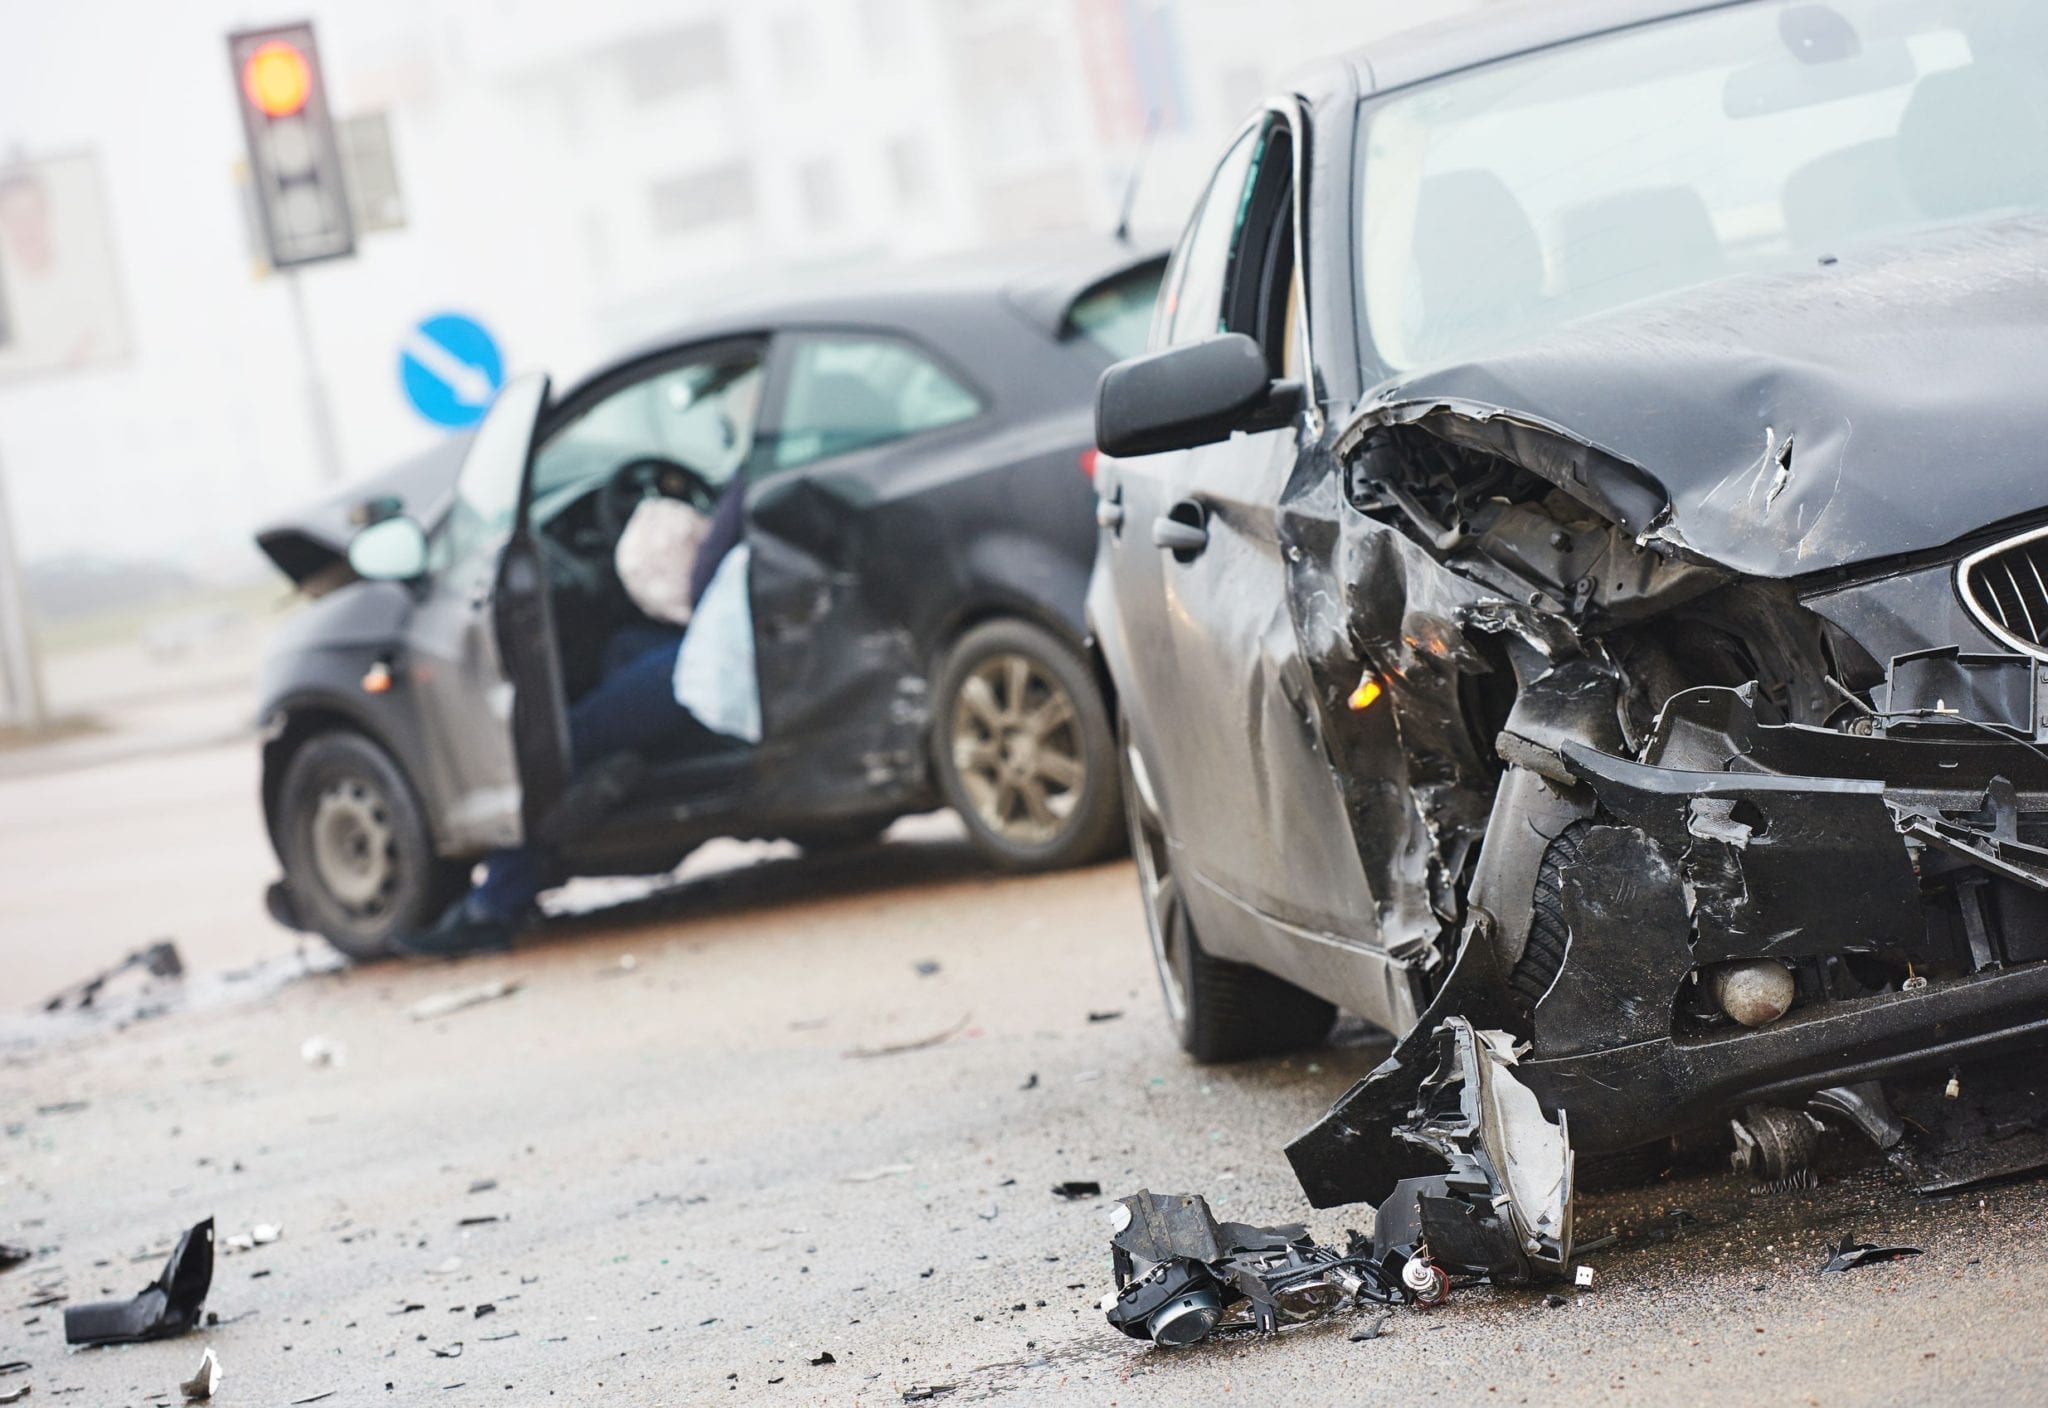 Auto Accidents Are the Top Cause of Child Deaths